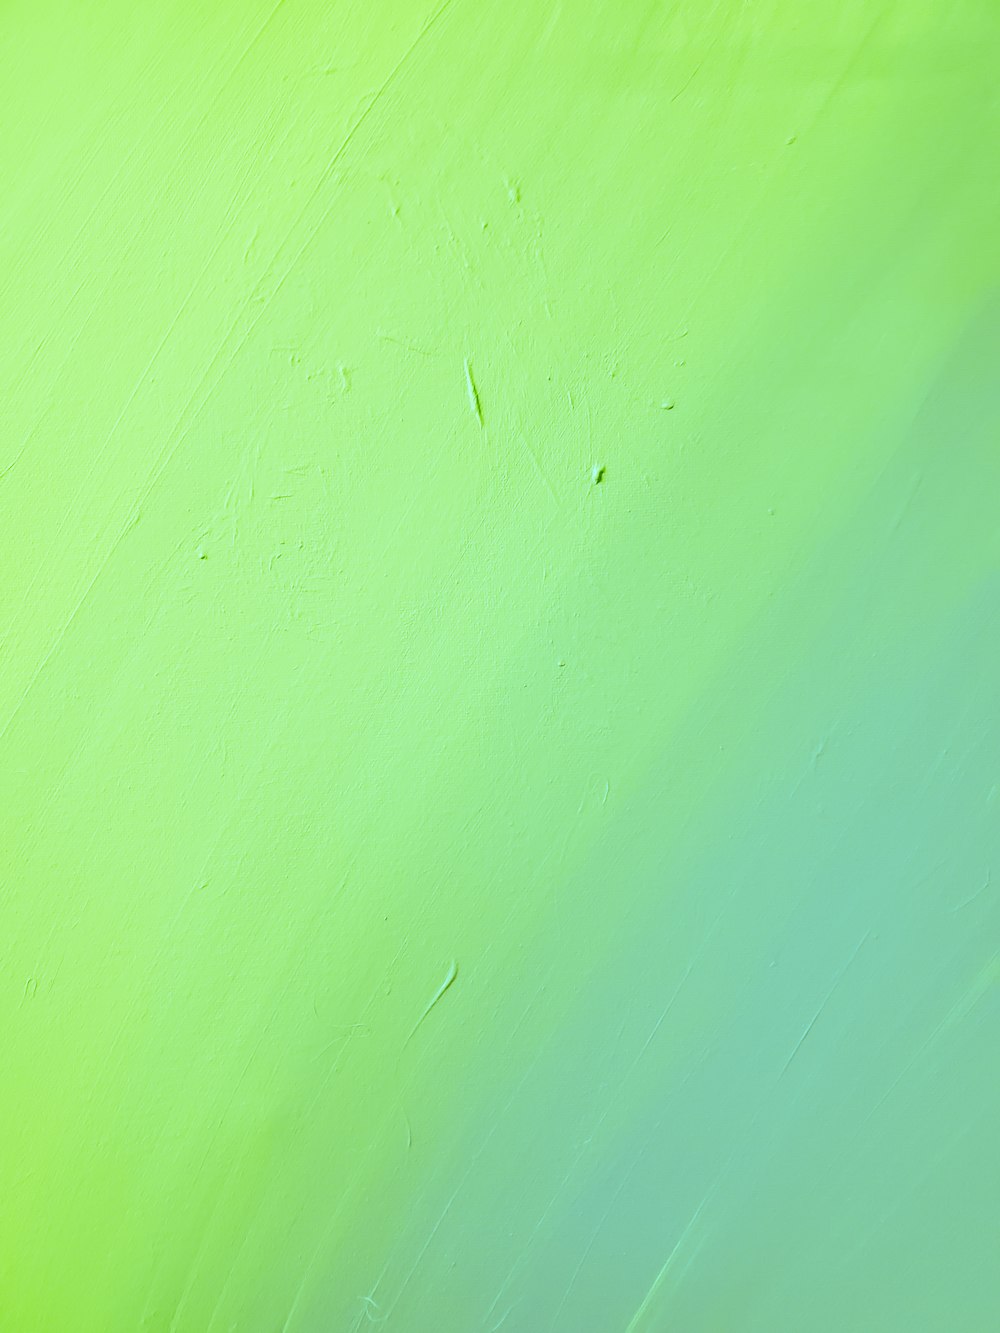 green painted wall with hole photo – Free Green Image on Unsplash